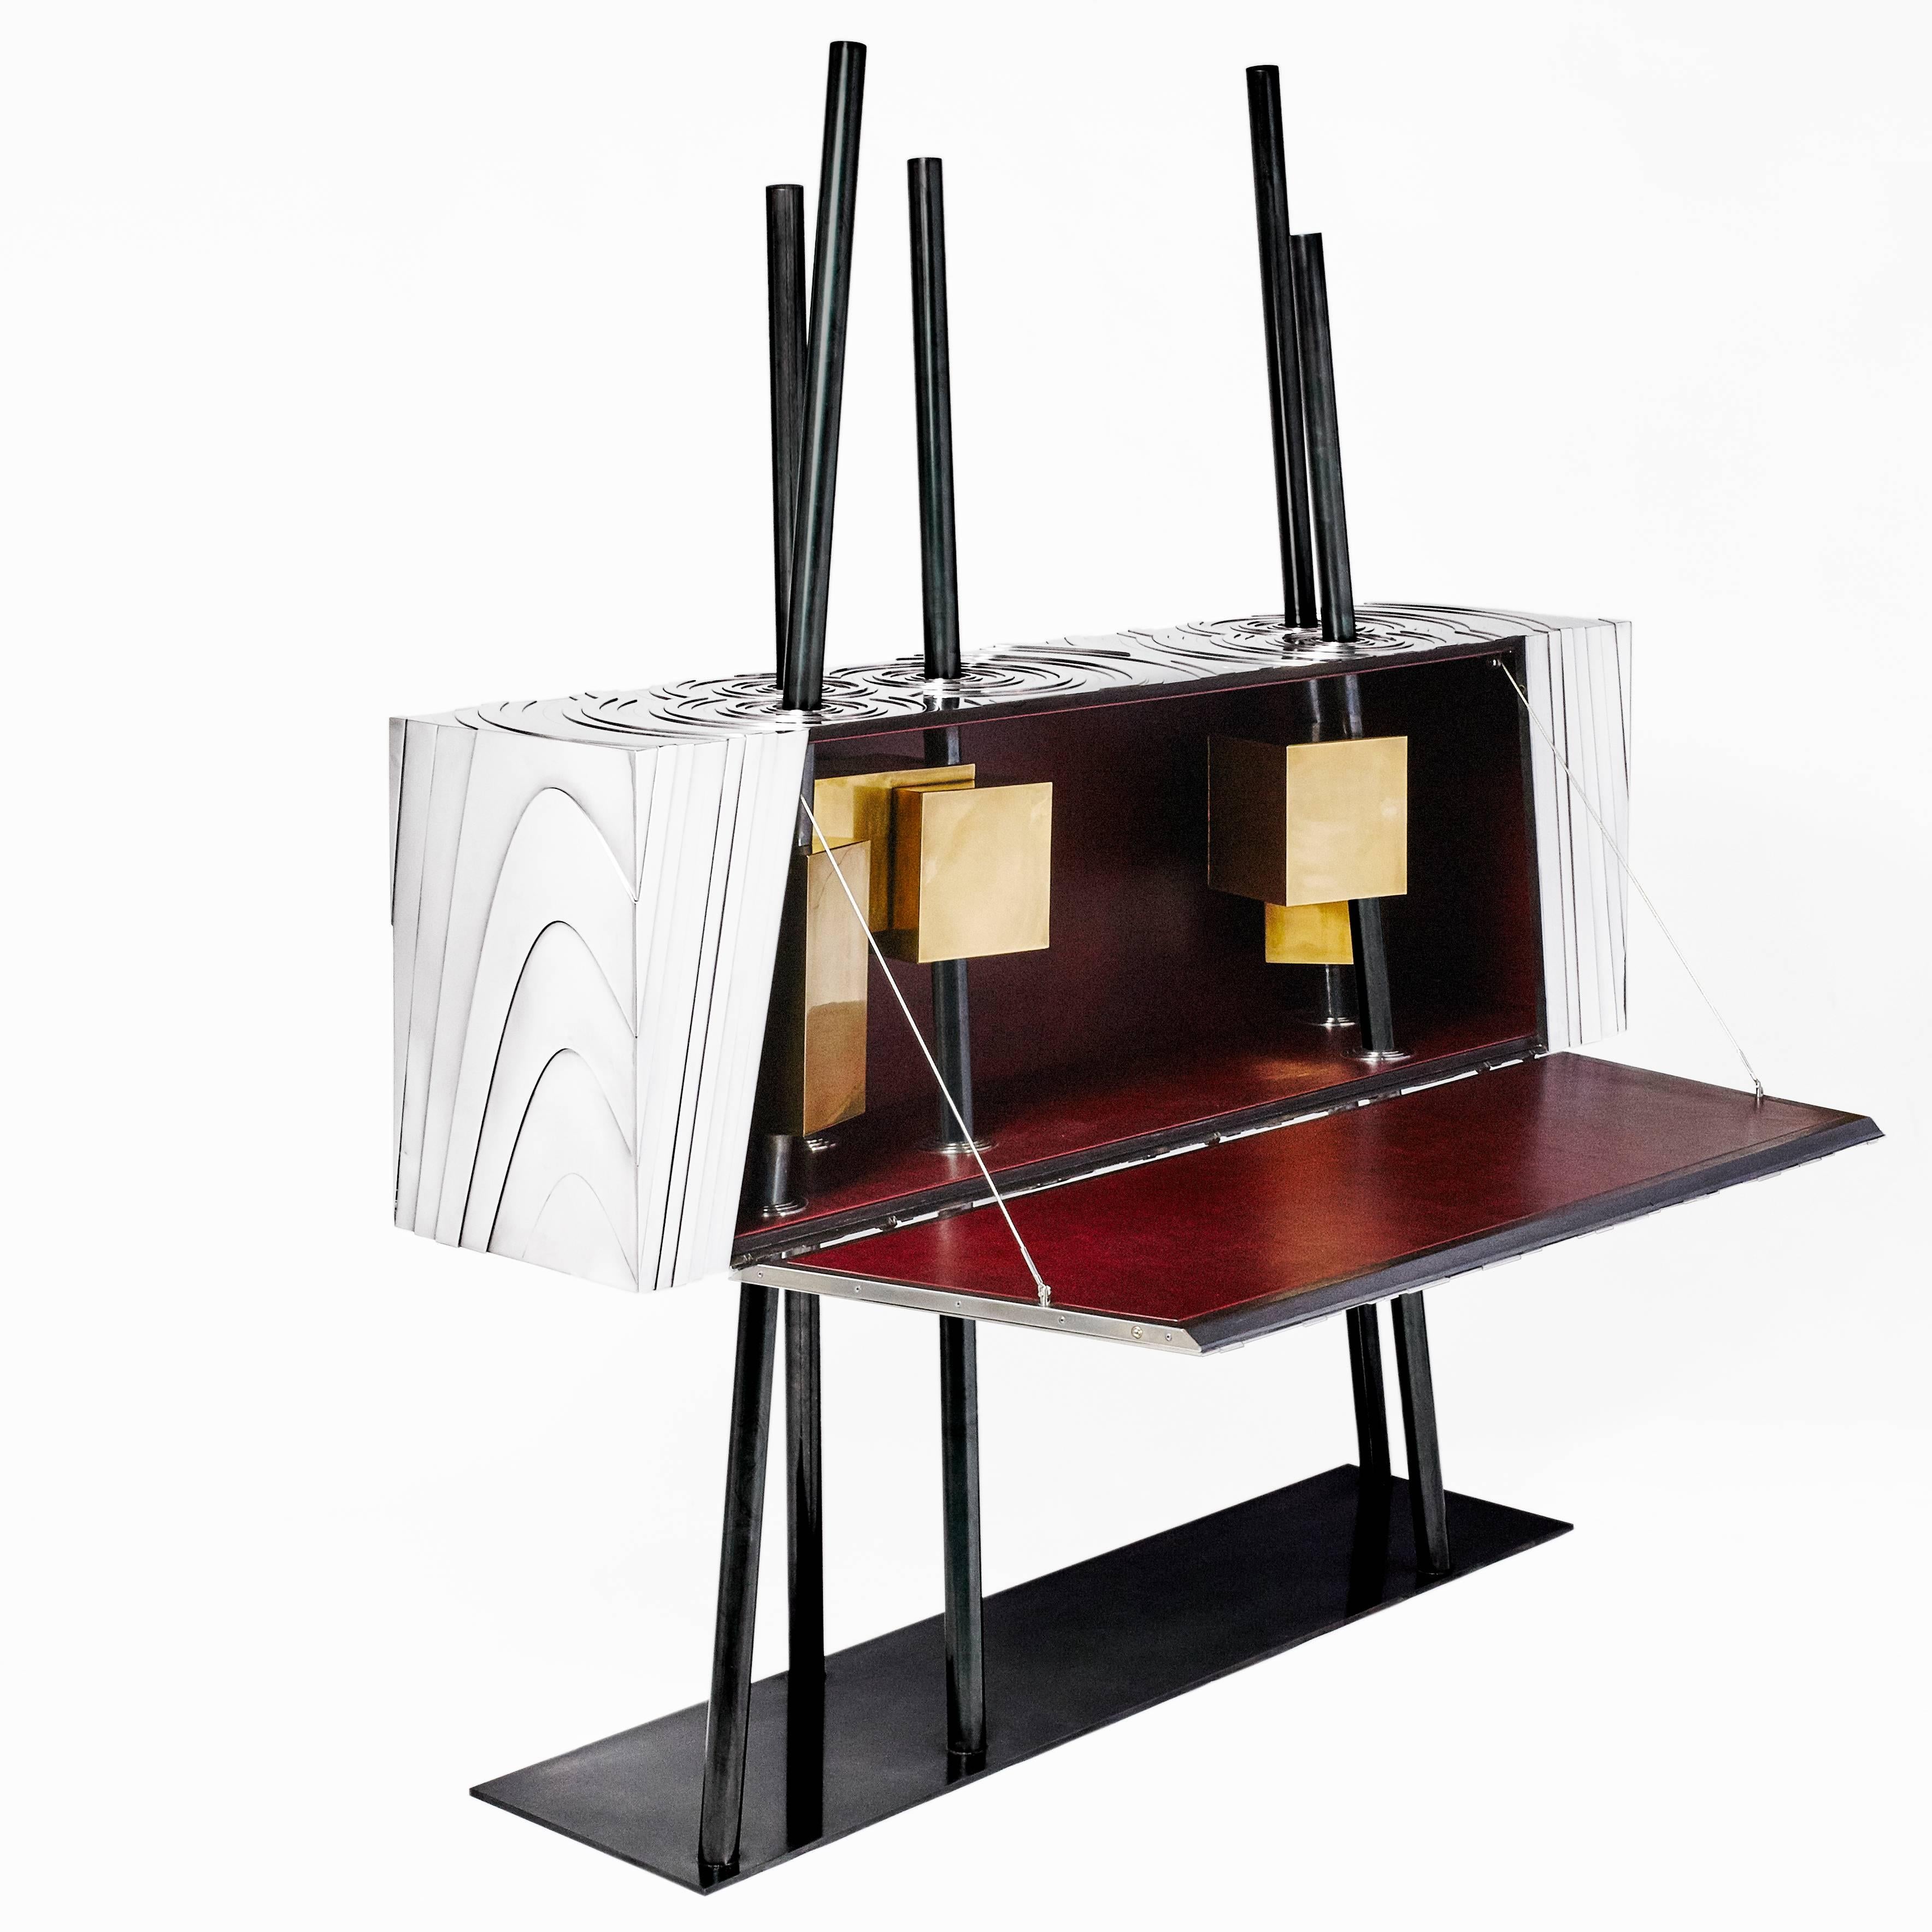 Cabinet, 2015

Unique piece

Stainless and patinated steel, interior: Leather and brass

Measures: L 78.7 x W 17.7 x H 86.6 in

(200 x 45 x 220 cm)

